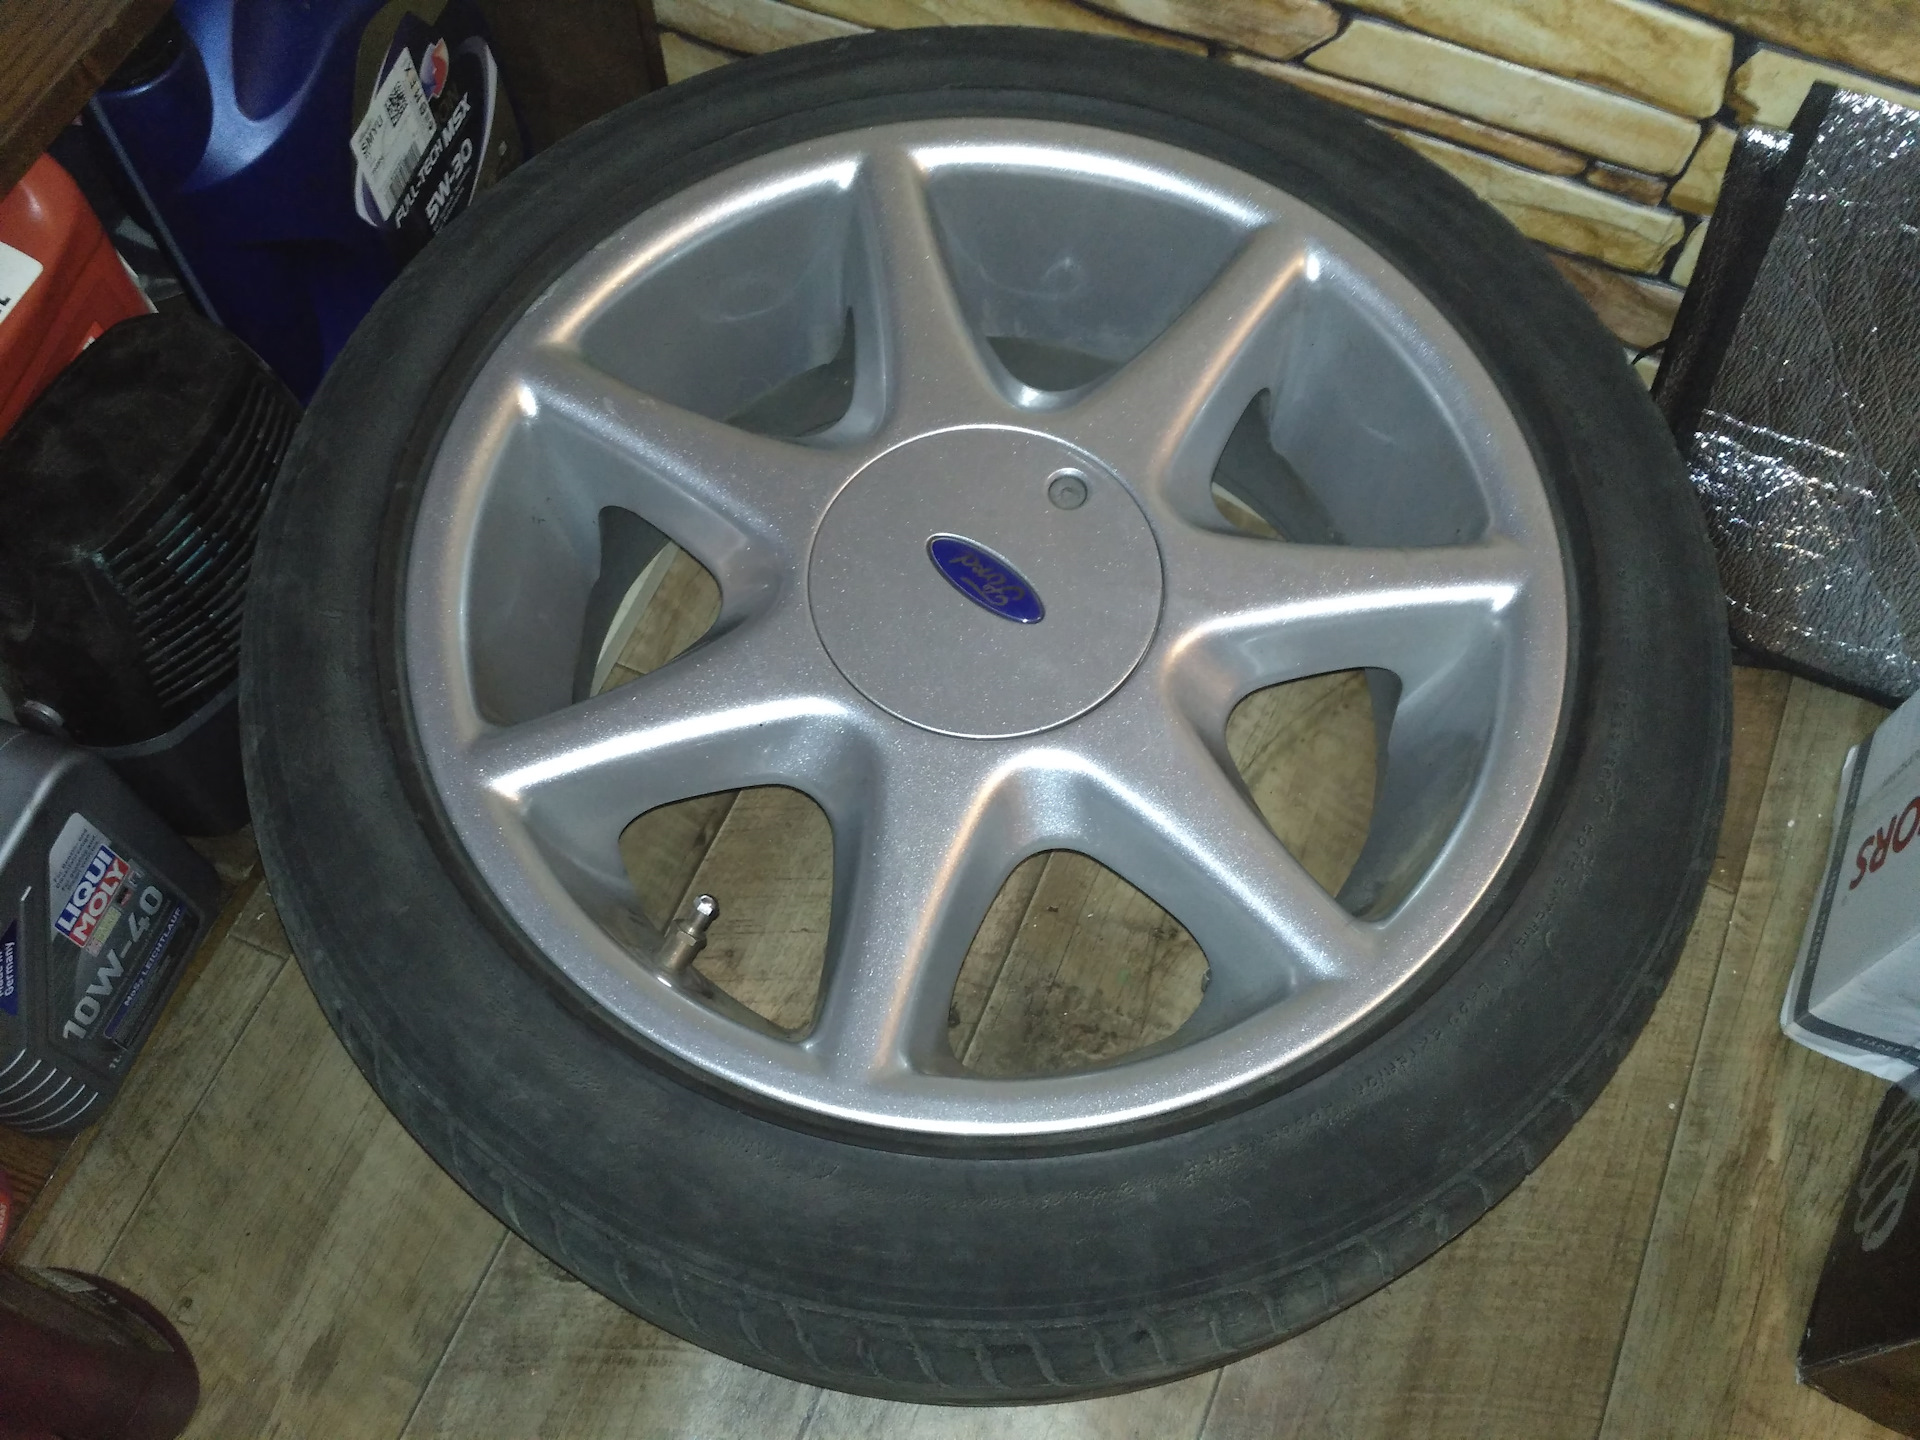 Диск Ford Ronal Centra r17. Centra r15 211705.